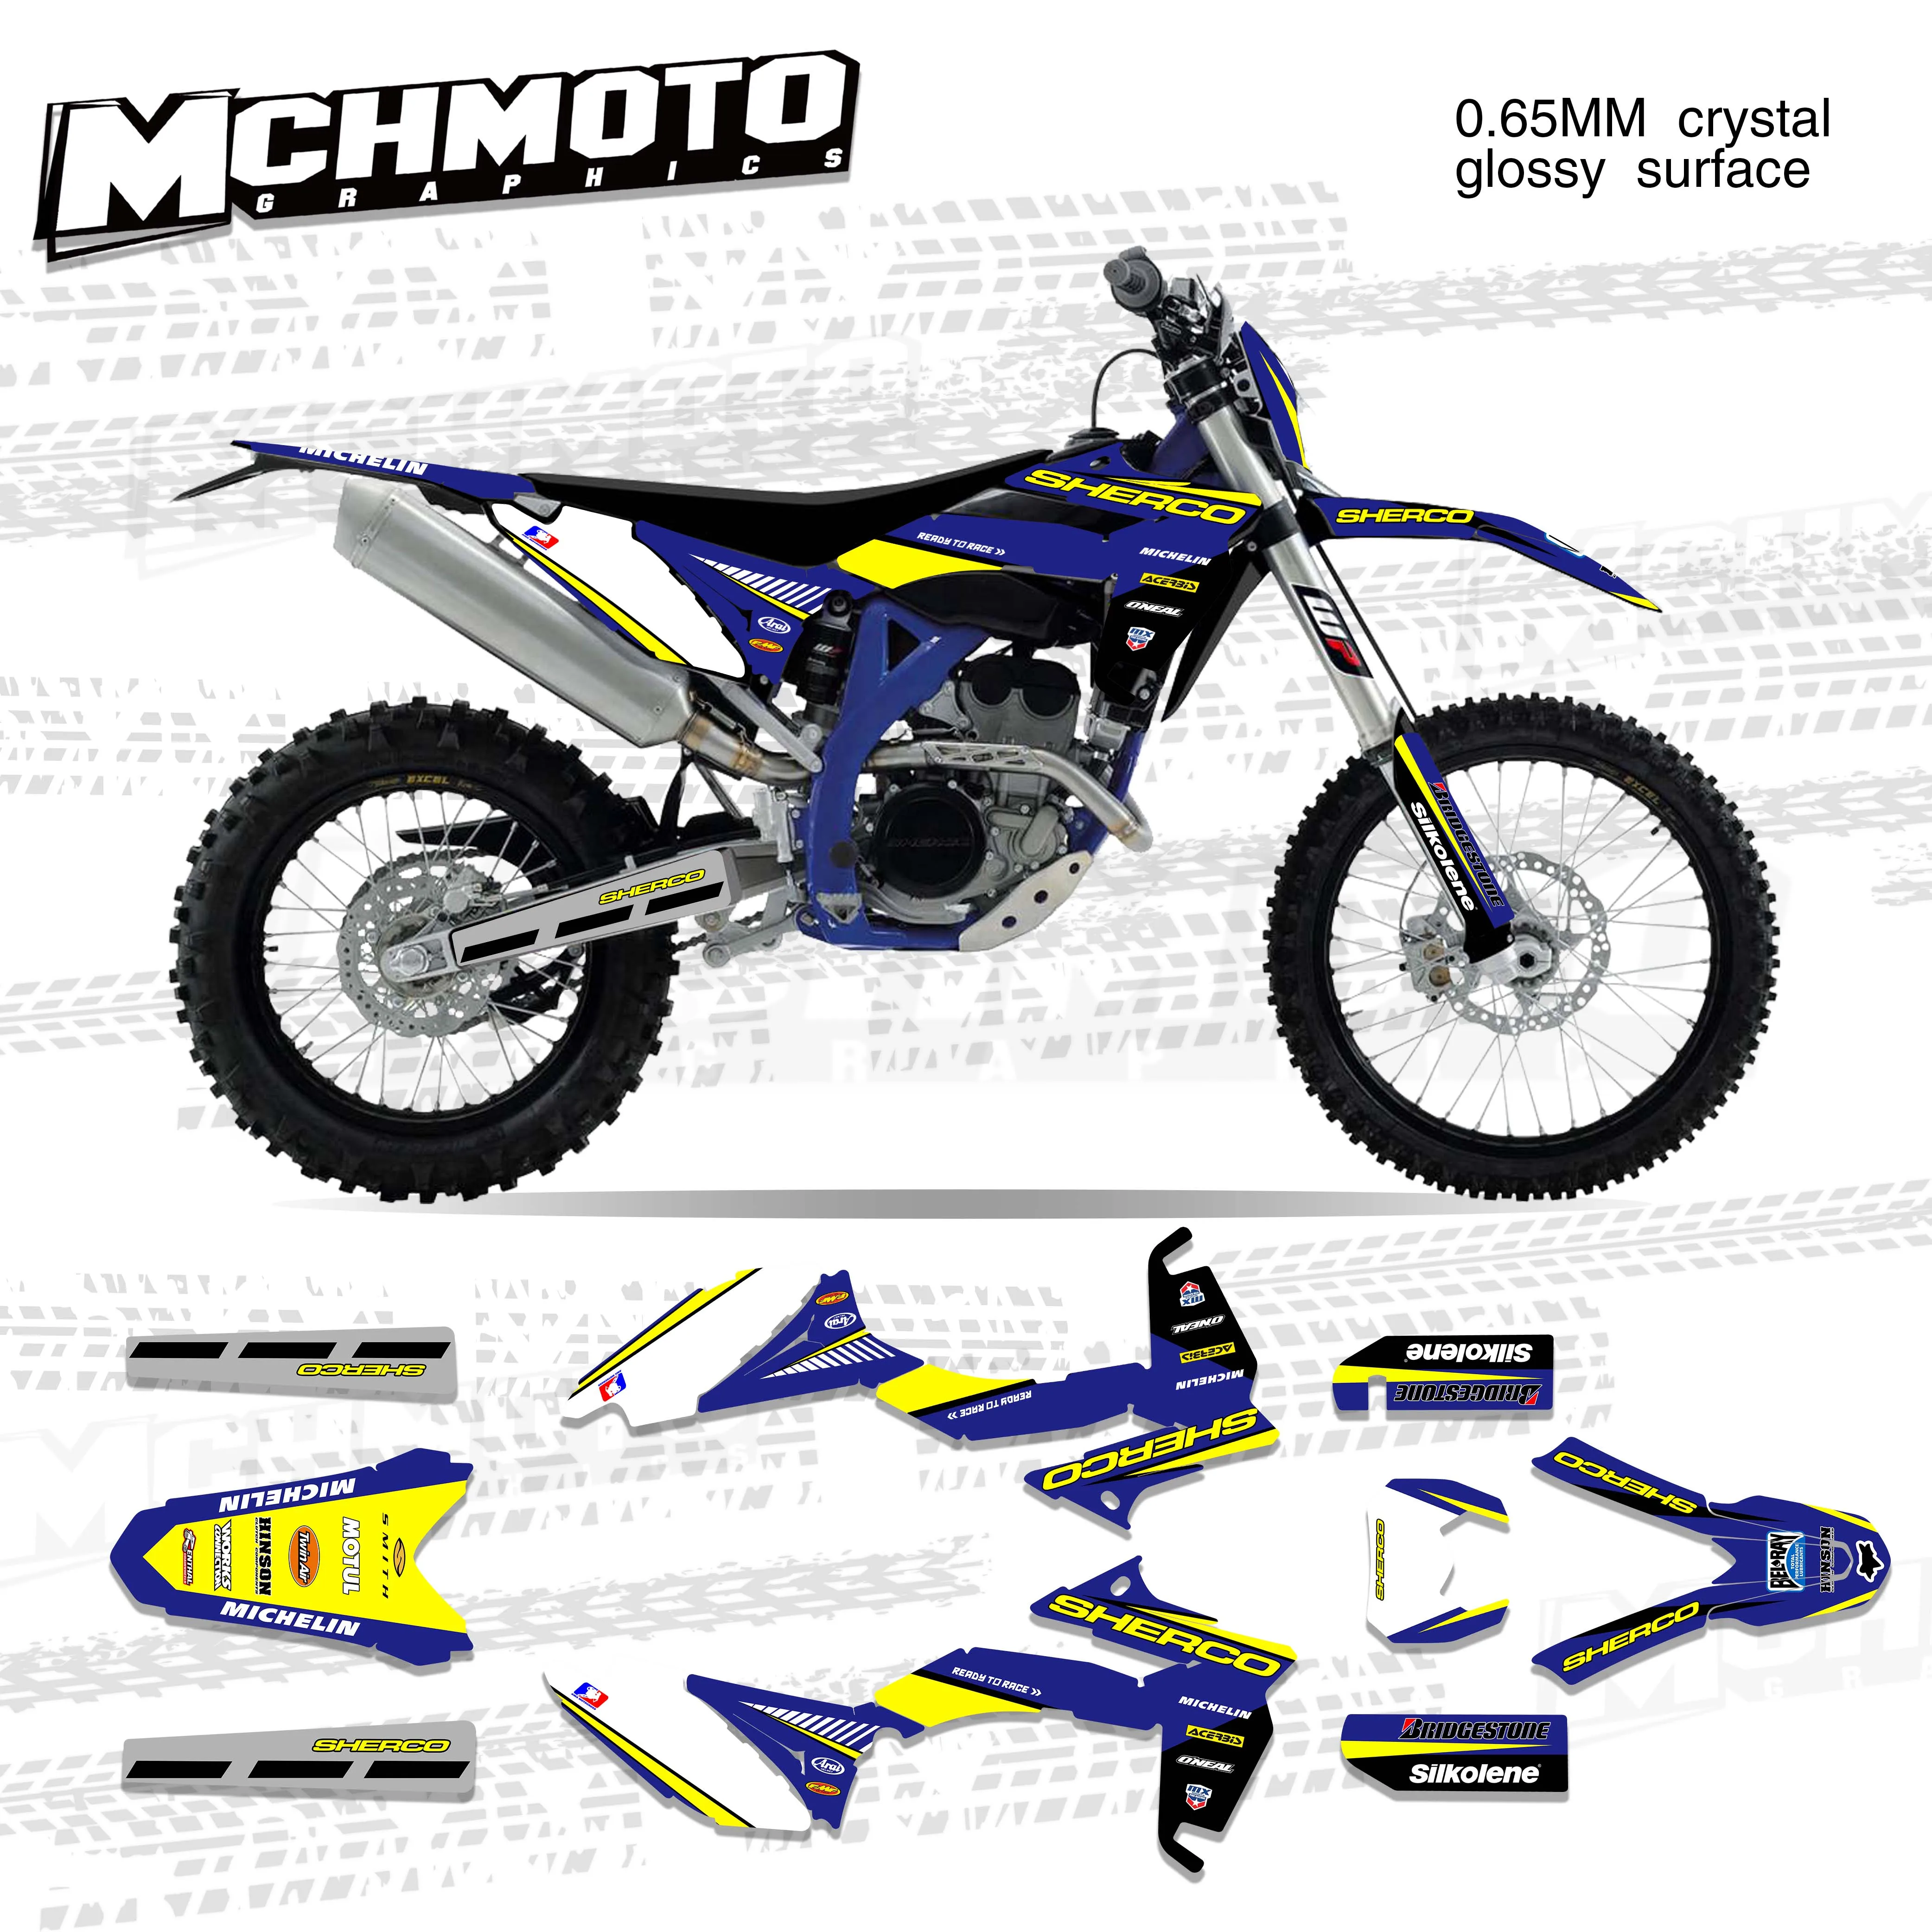 MCHMFG   Decal for Sherco SE SEF SER 125 250 300 450 2012 2013 2014 2015 2016 Motorcycle Fairing Sticker Kit